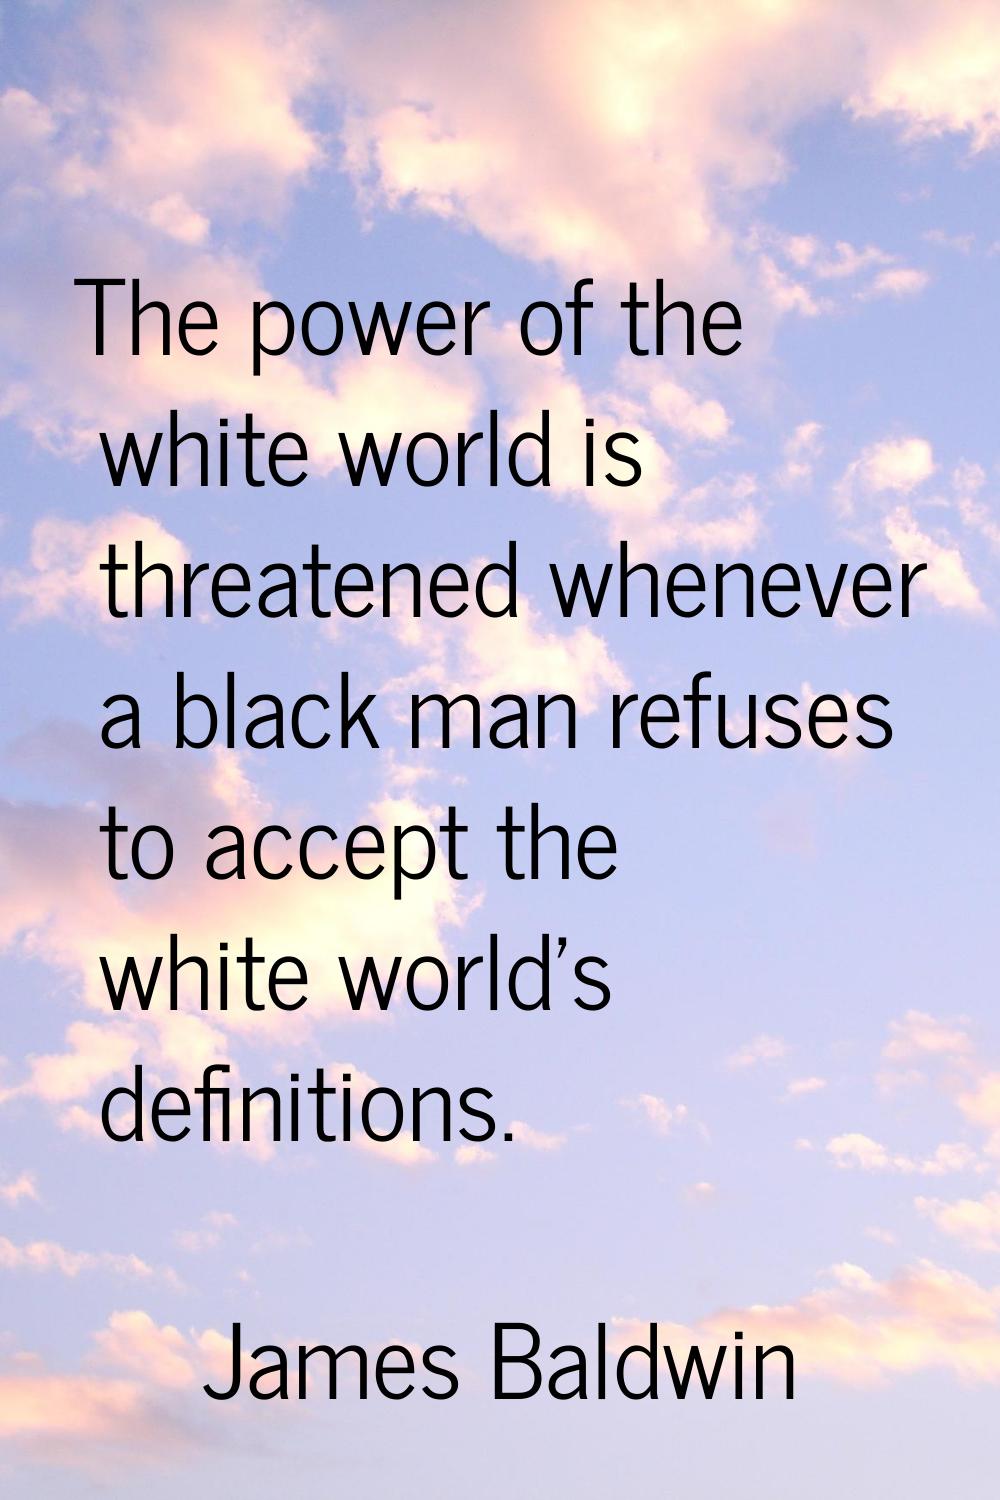 The power of the white world is threatened whenever a black man refuses to accept the white world's